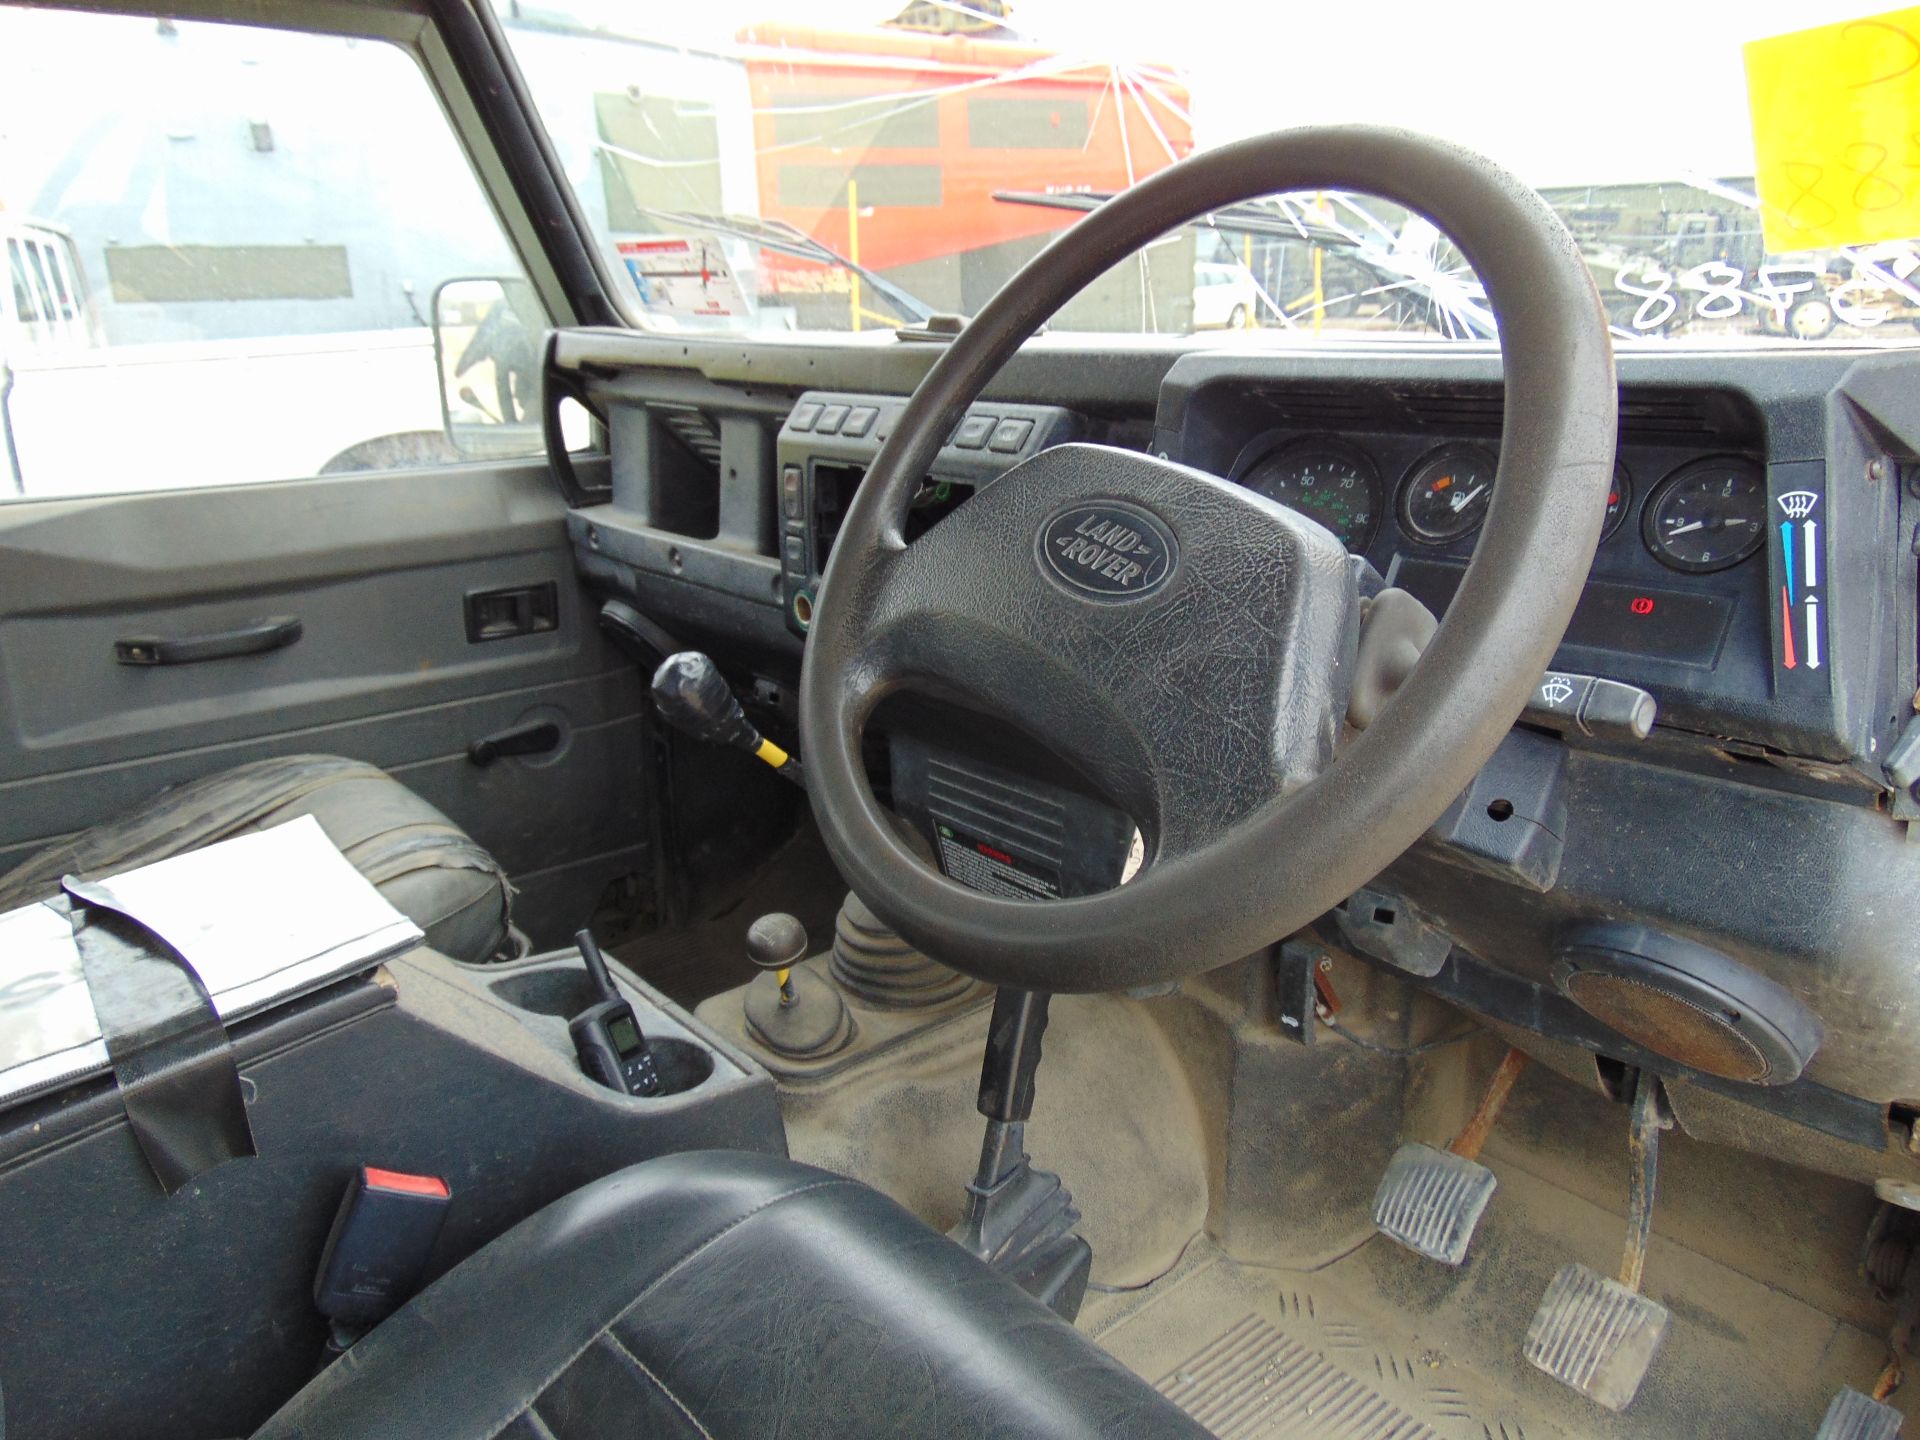 Land Rover Defender 130 TD5 Double Cab Pick Up - Image 9 of 18